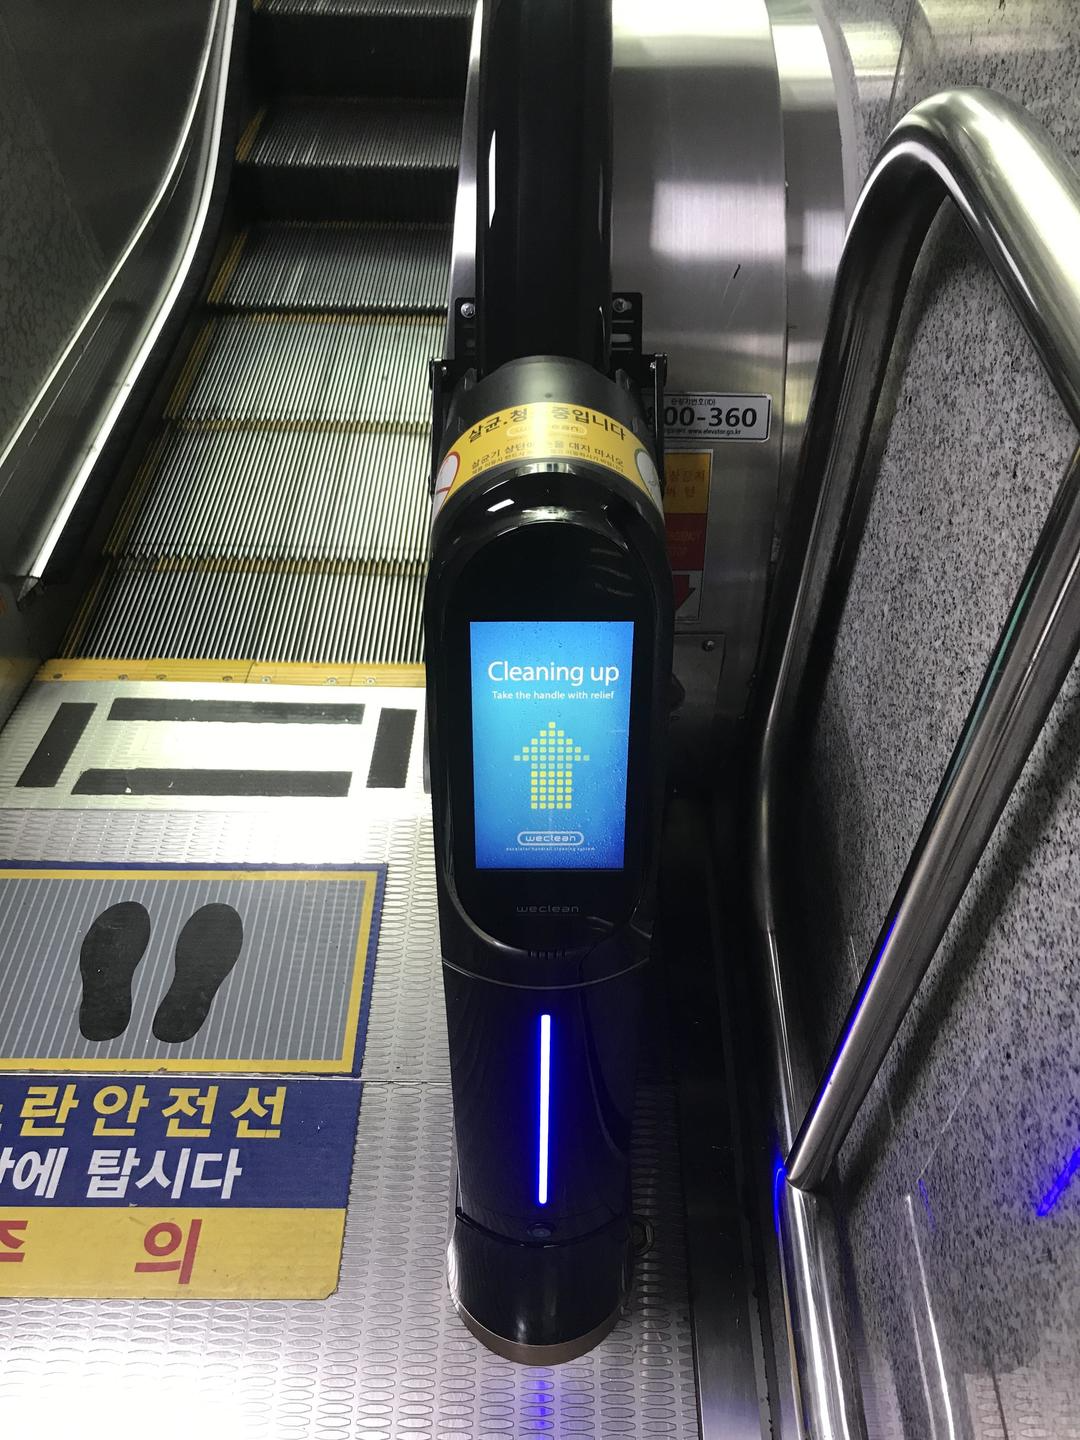 In 2022, introduce Weclean, an automatic sterilization and vacuum cleaner for escalator handles, at Sangin Station, a pilot station to respond to COVID-19 in Daegu subway 2